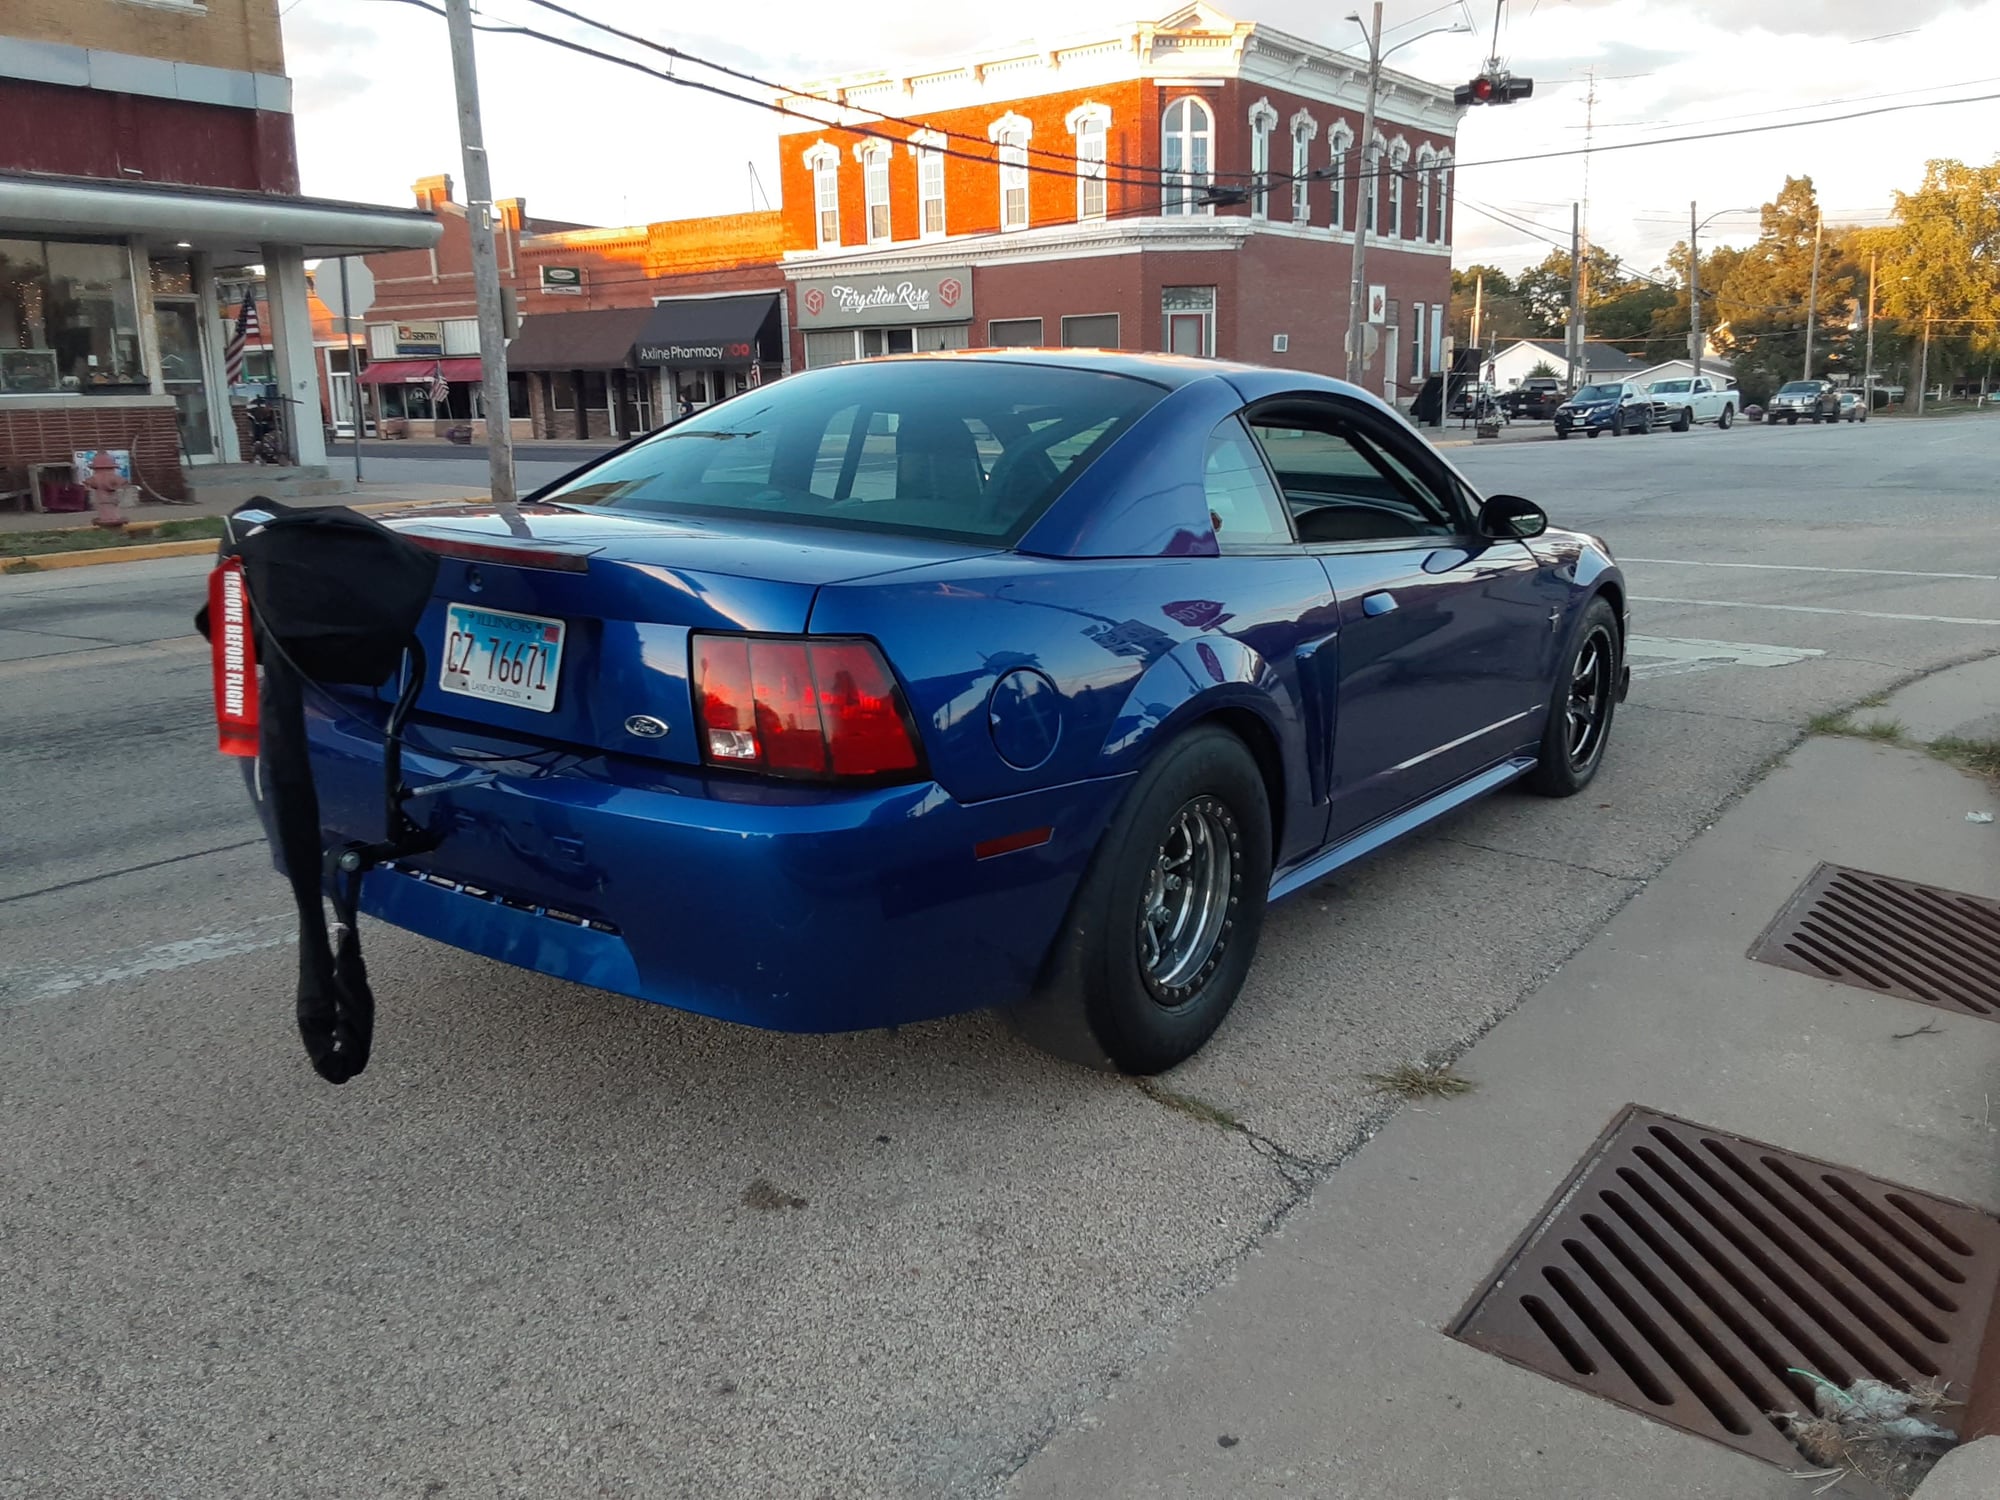 2002 Ford Mustang - 2002 mustang L33 turbo - Used - VIN 1LNHM81WX5Y661564 - 1 Miles - 8 cyl - 2WD - Automatic - Coupe - Blue - Roseville, IL 61473, United States